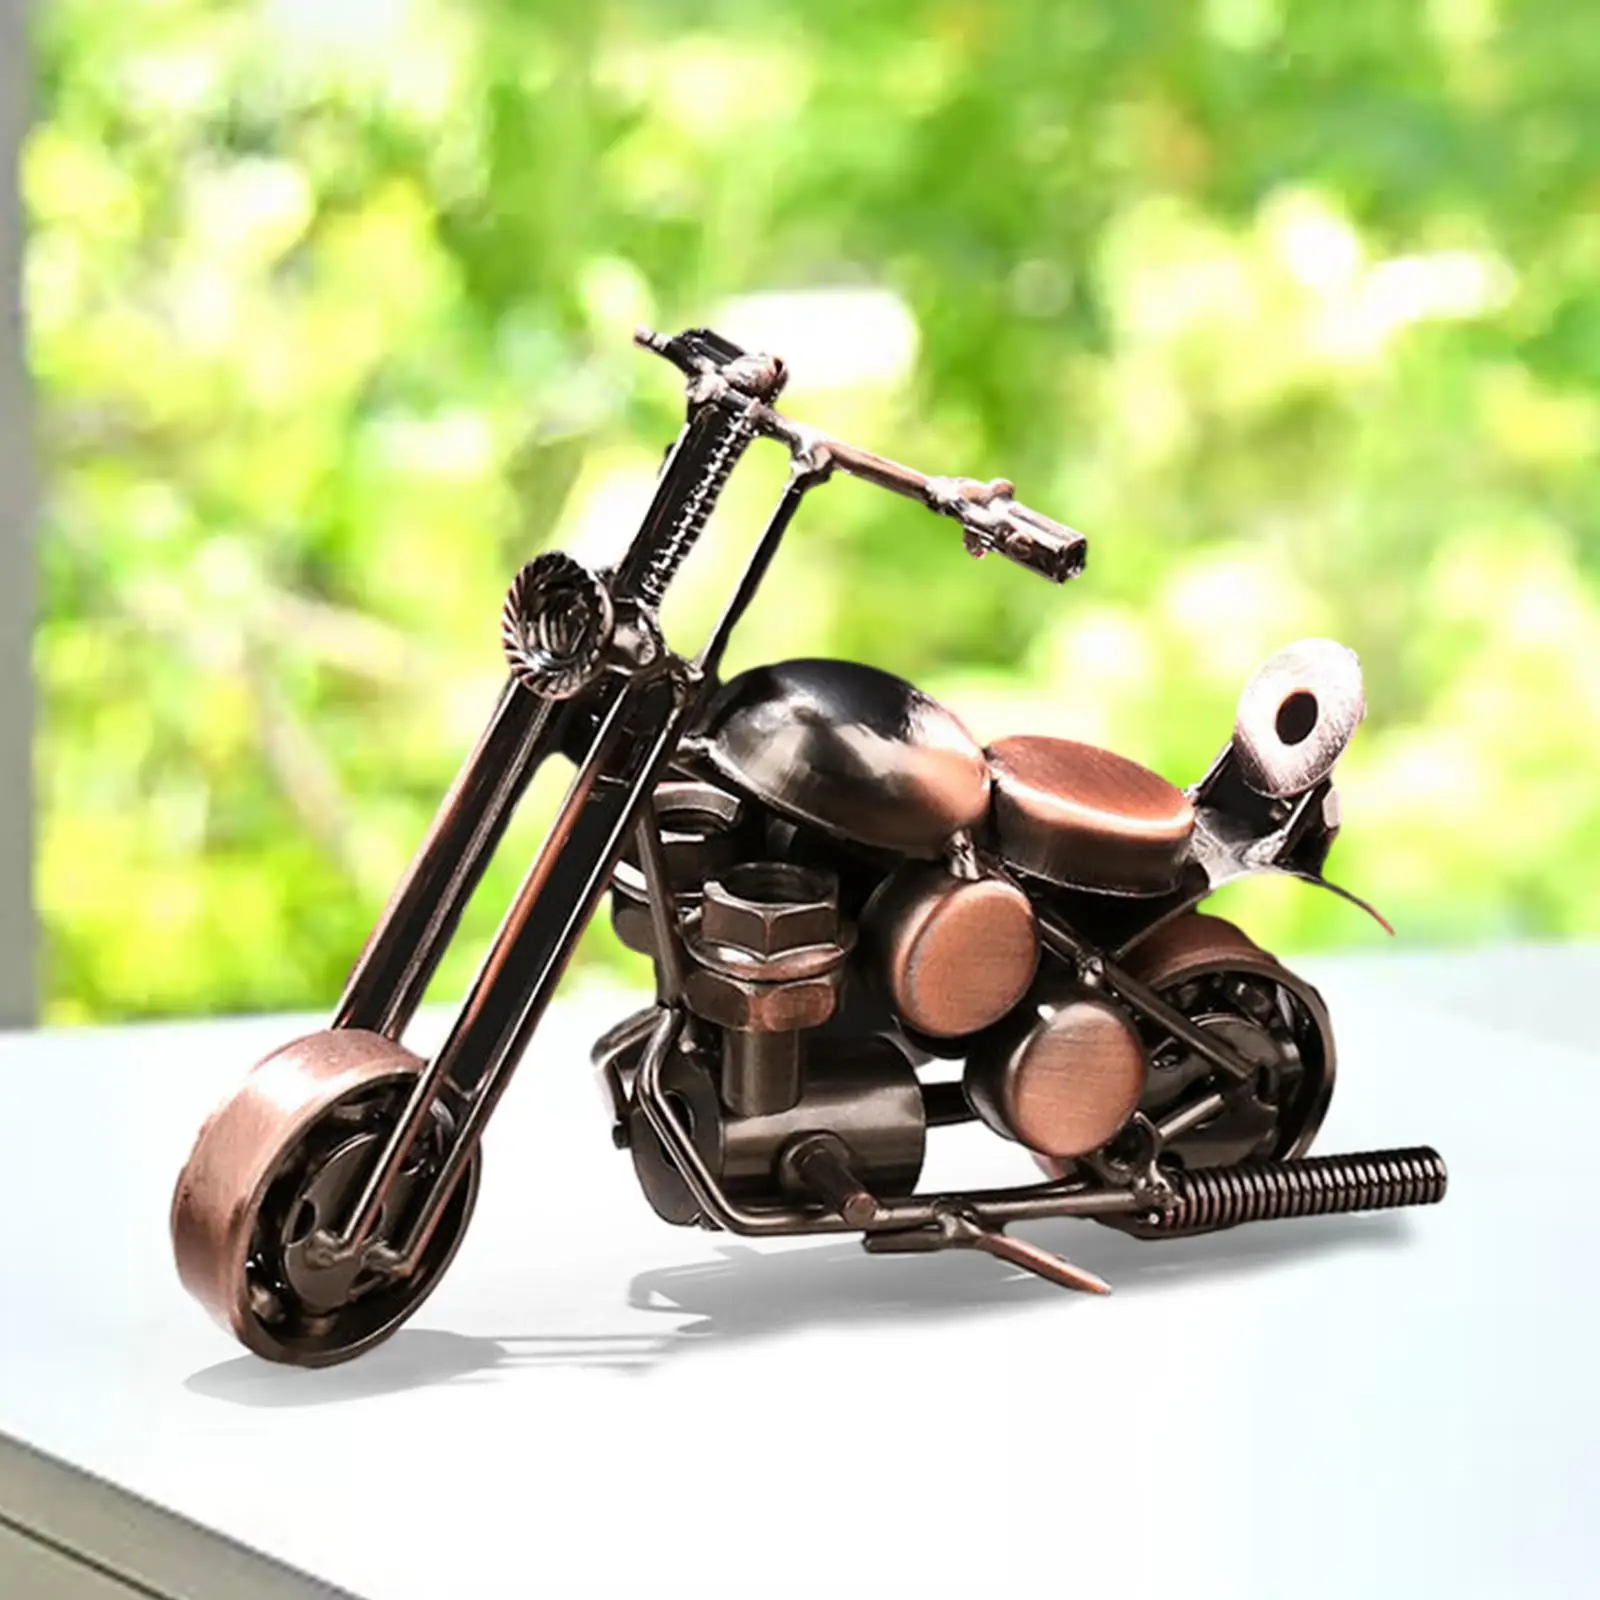 Metal Motorcycle Model Motorcycle Sculpture Accessories Vintage Style Collection Ornament for Bookshelf Desk Office Boyfriend